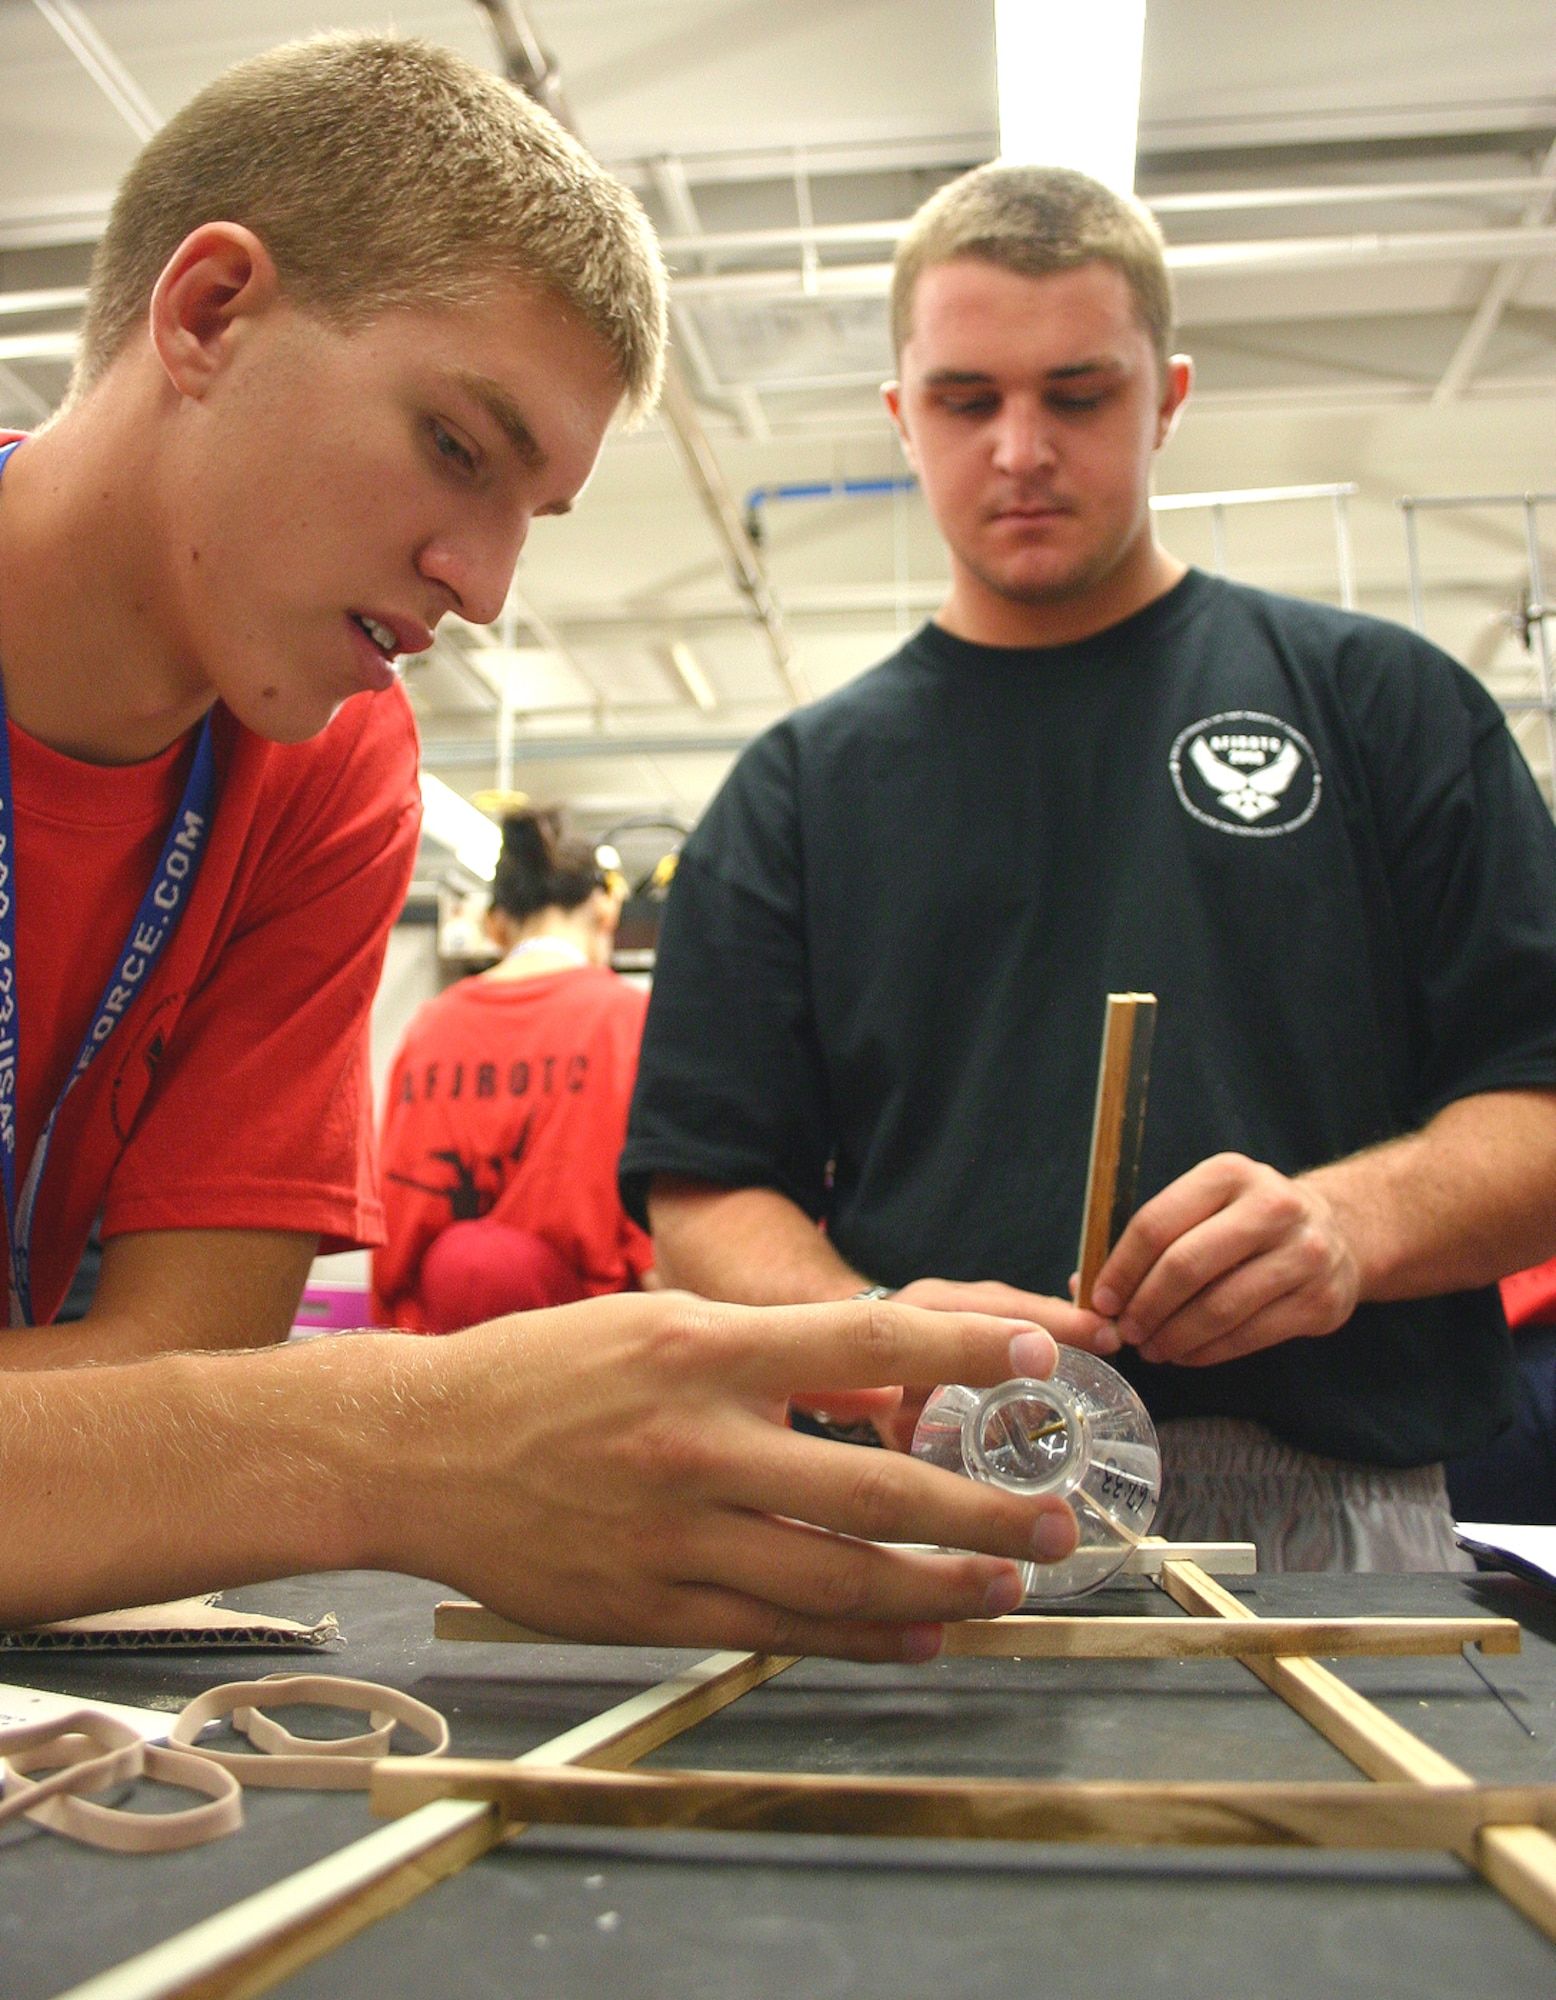 Air Force Junior ROTC Cadets Ryan Moran from South Carolina and John Coleman from California piece together the framework of their rocket car July 29 during the 2008 Air Force Junior ROTC Aerospace and Technology Honor Camp at Albuquerque, N.M. (U.S. Air Force photo/Staff Sgt. Jason Lake)